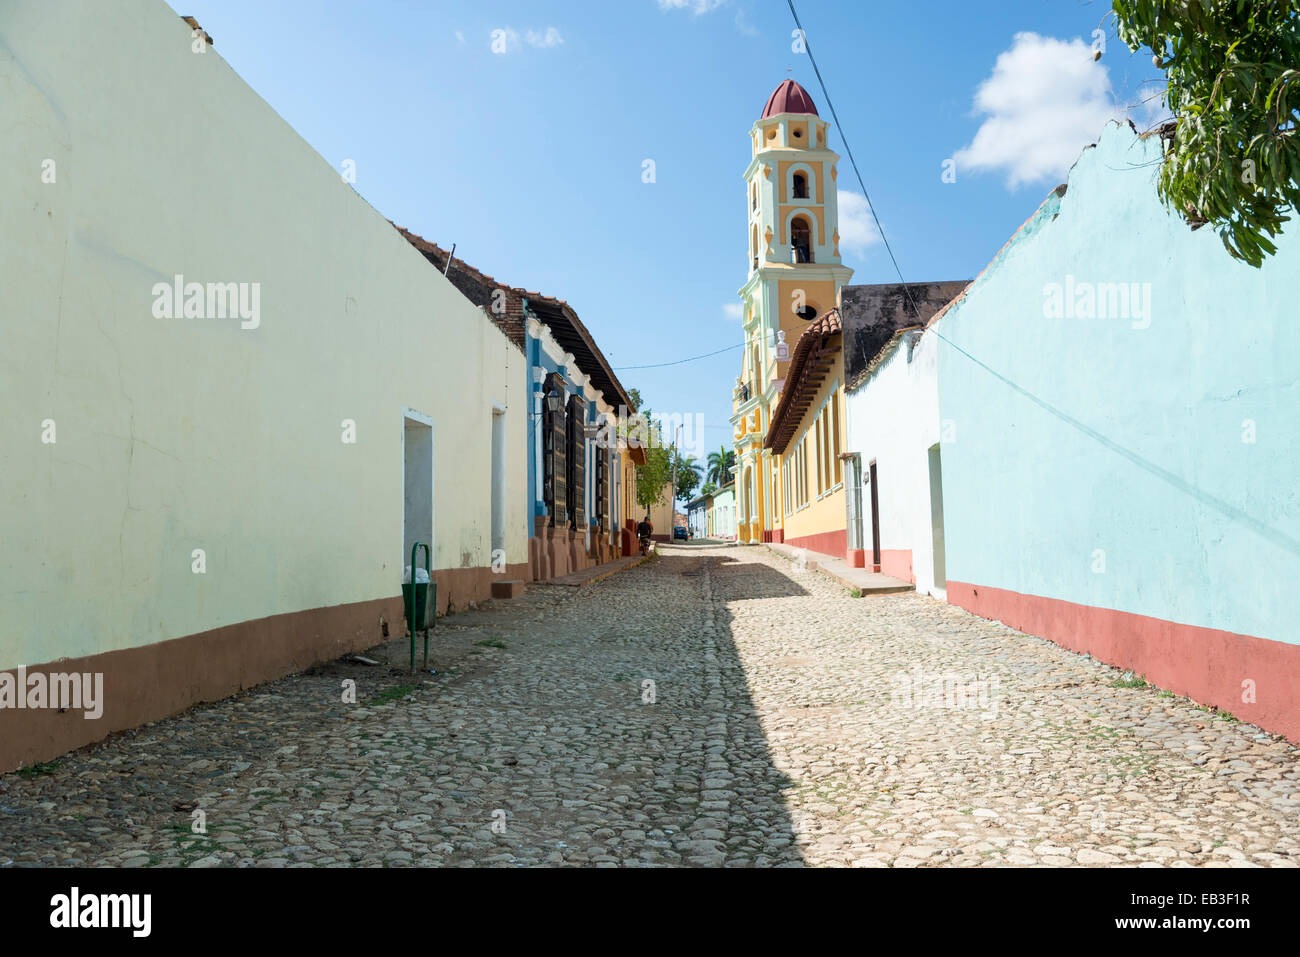 TRINIDAD, CUBA - MAY 8, 2014: Old town of Trinidad, Cuba. Trinidad is a historical town listed by UNESCO as World Heritage, it i Stock Photo